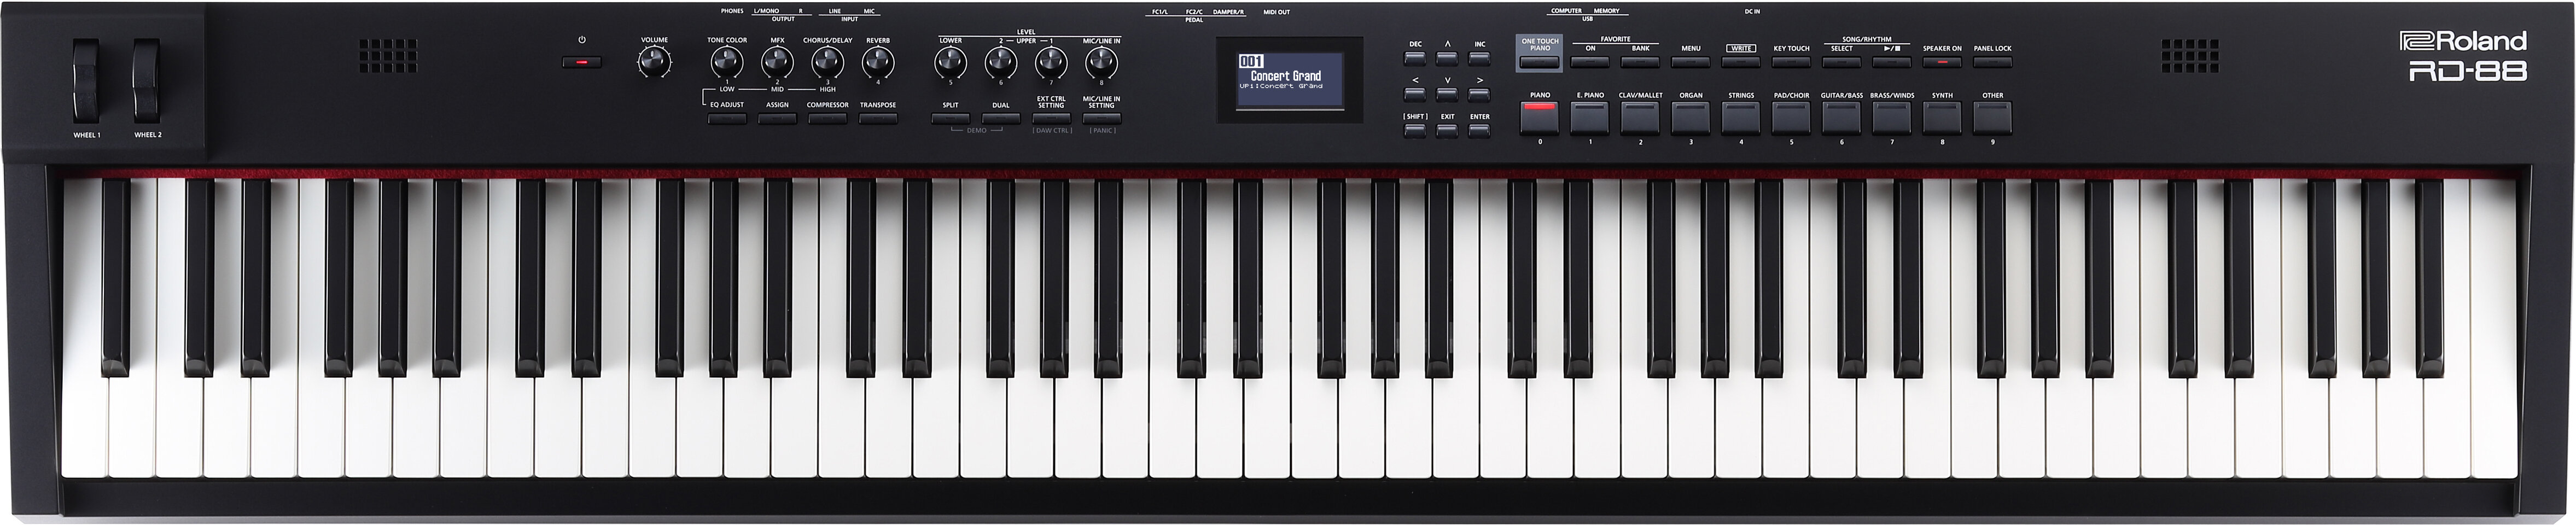 Roland RD88 Digital Stage Piano -  RD-88